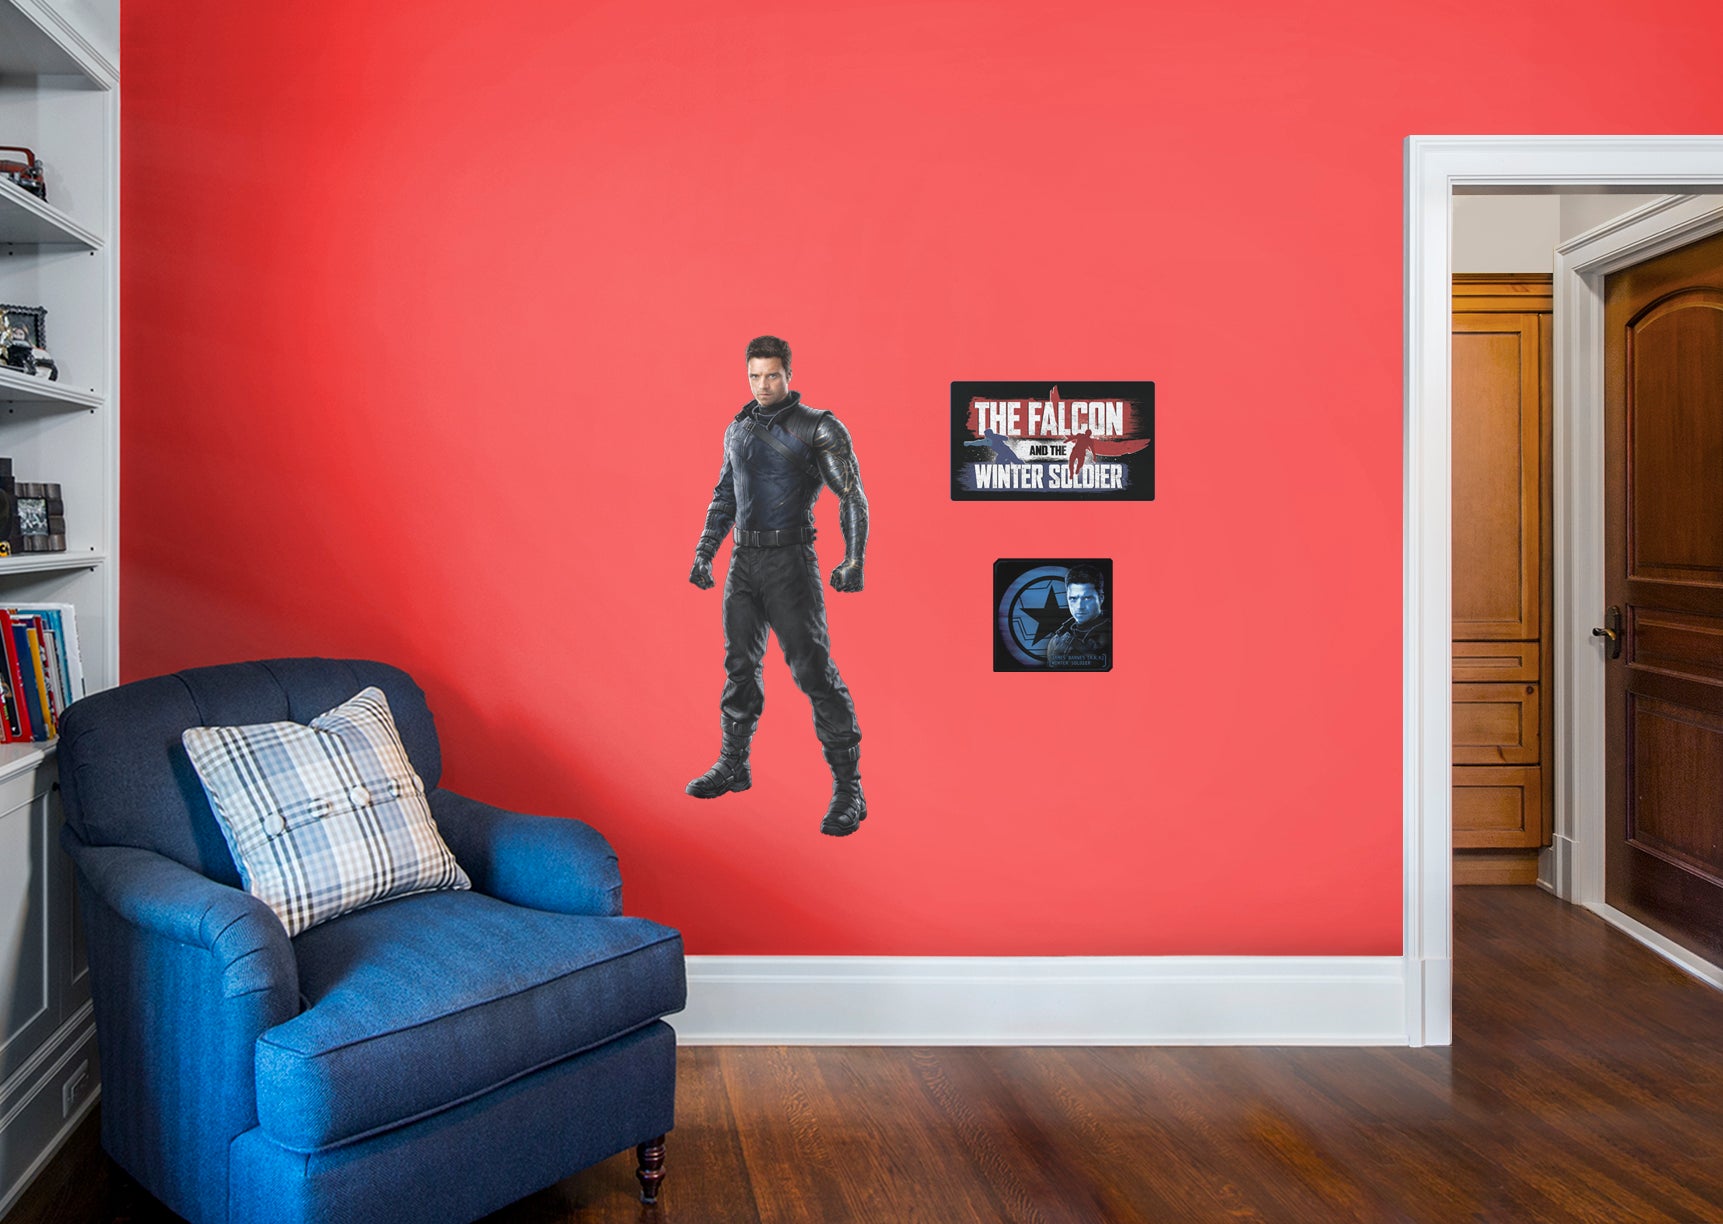 The Falcon & The Winter Soldier WINTER SOLDIER - Officially Licensed Marvel Removable Wall Decal Giant Character + 2 Decals by F